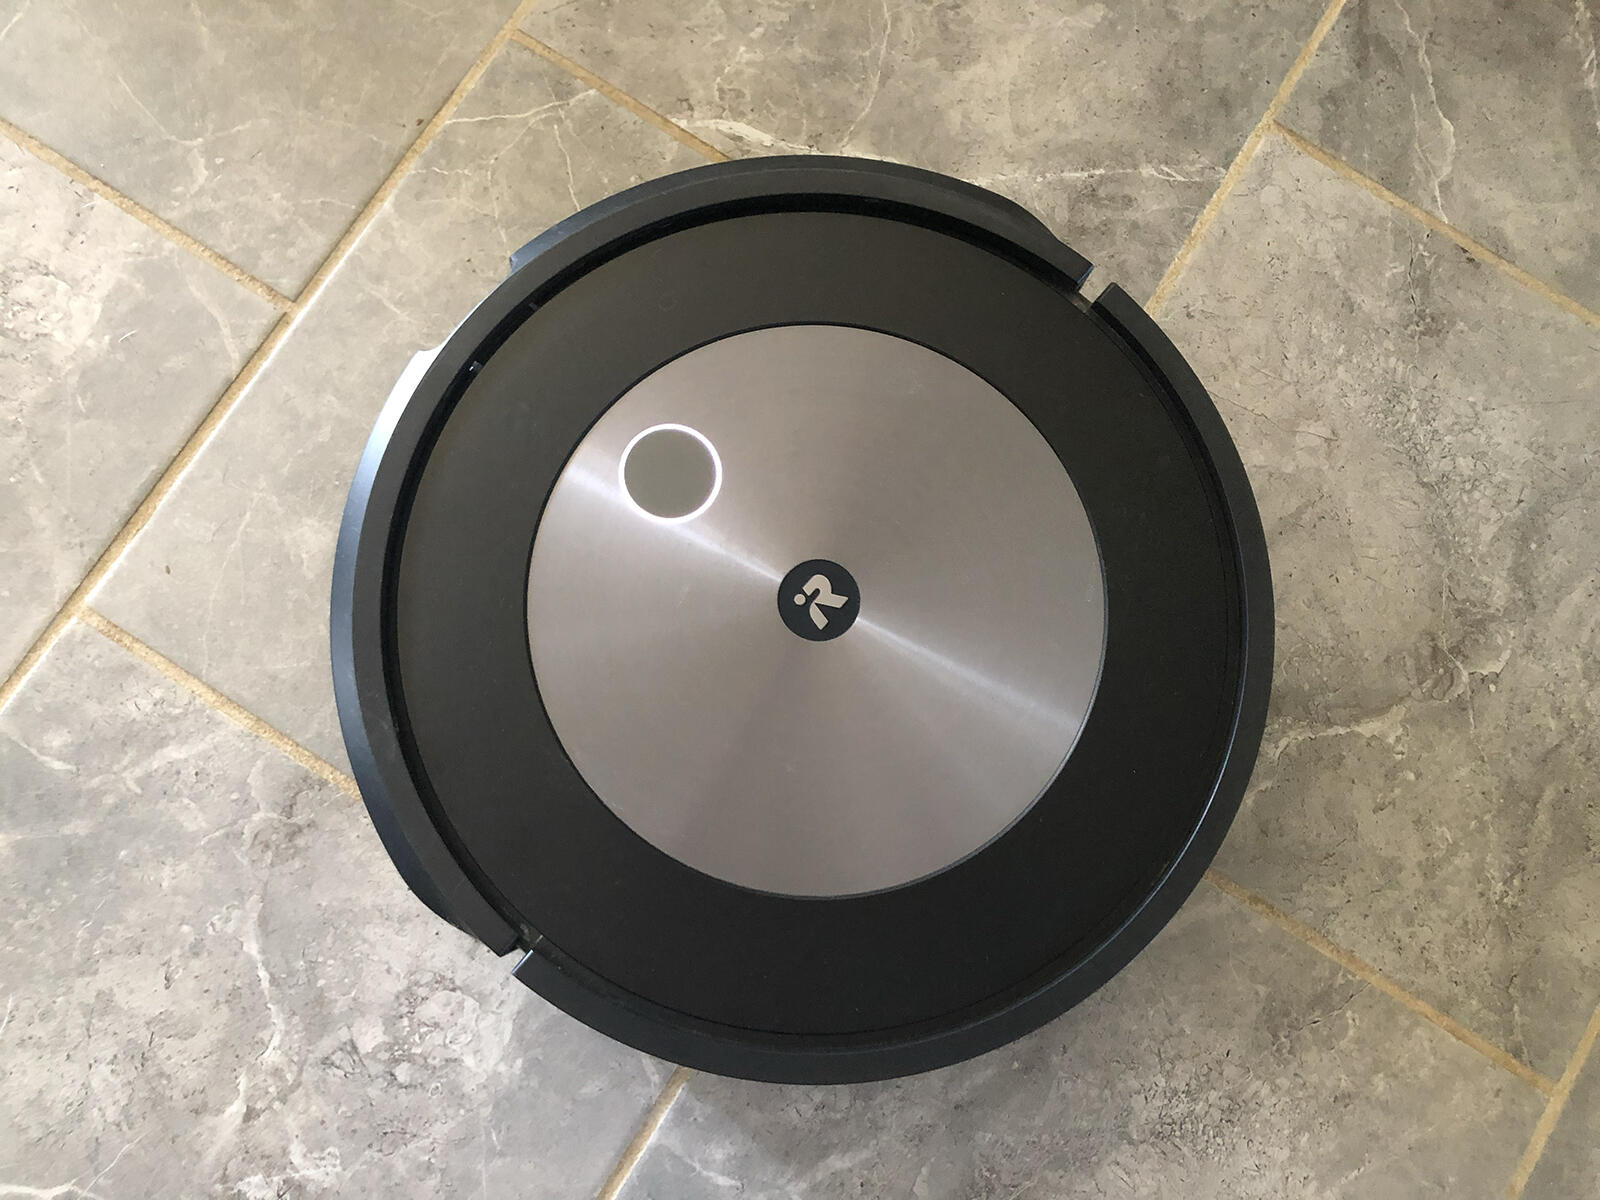 Roomba Combo j7 Plus review: an excellent robot vacuum with an